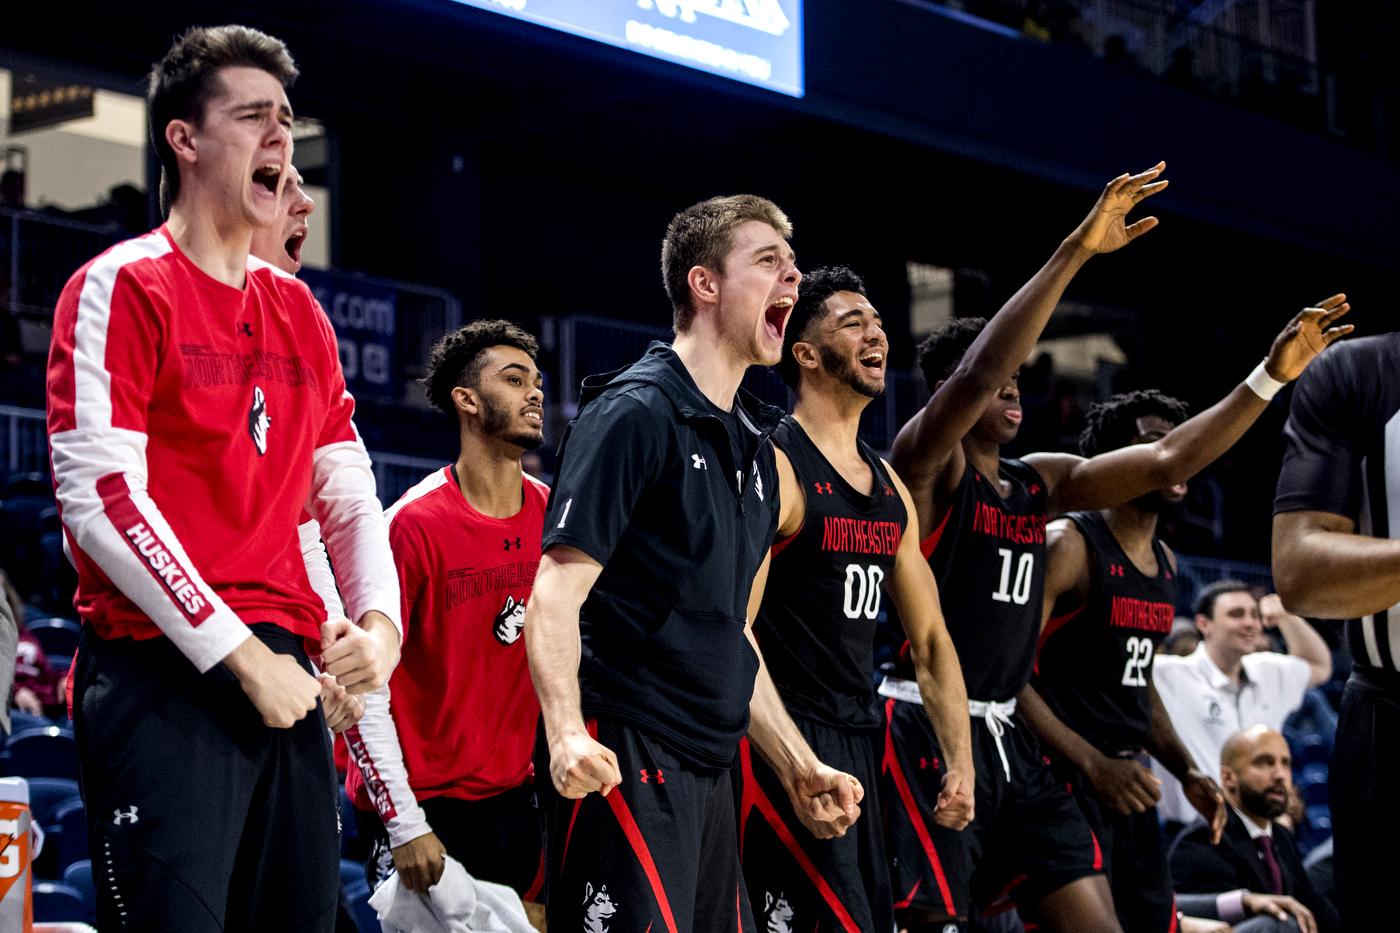 Northeastern advances in CAA tournament with 72-62 win over Towson